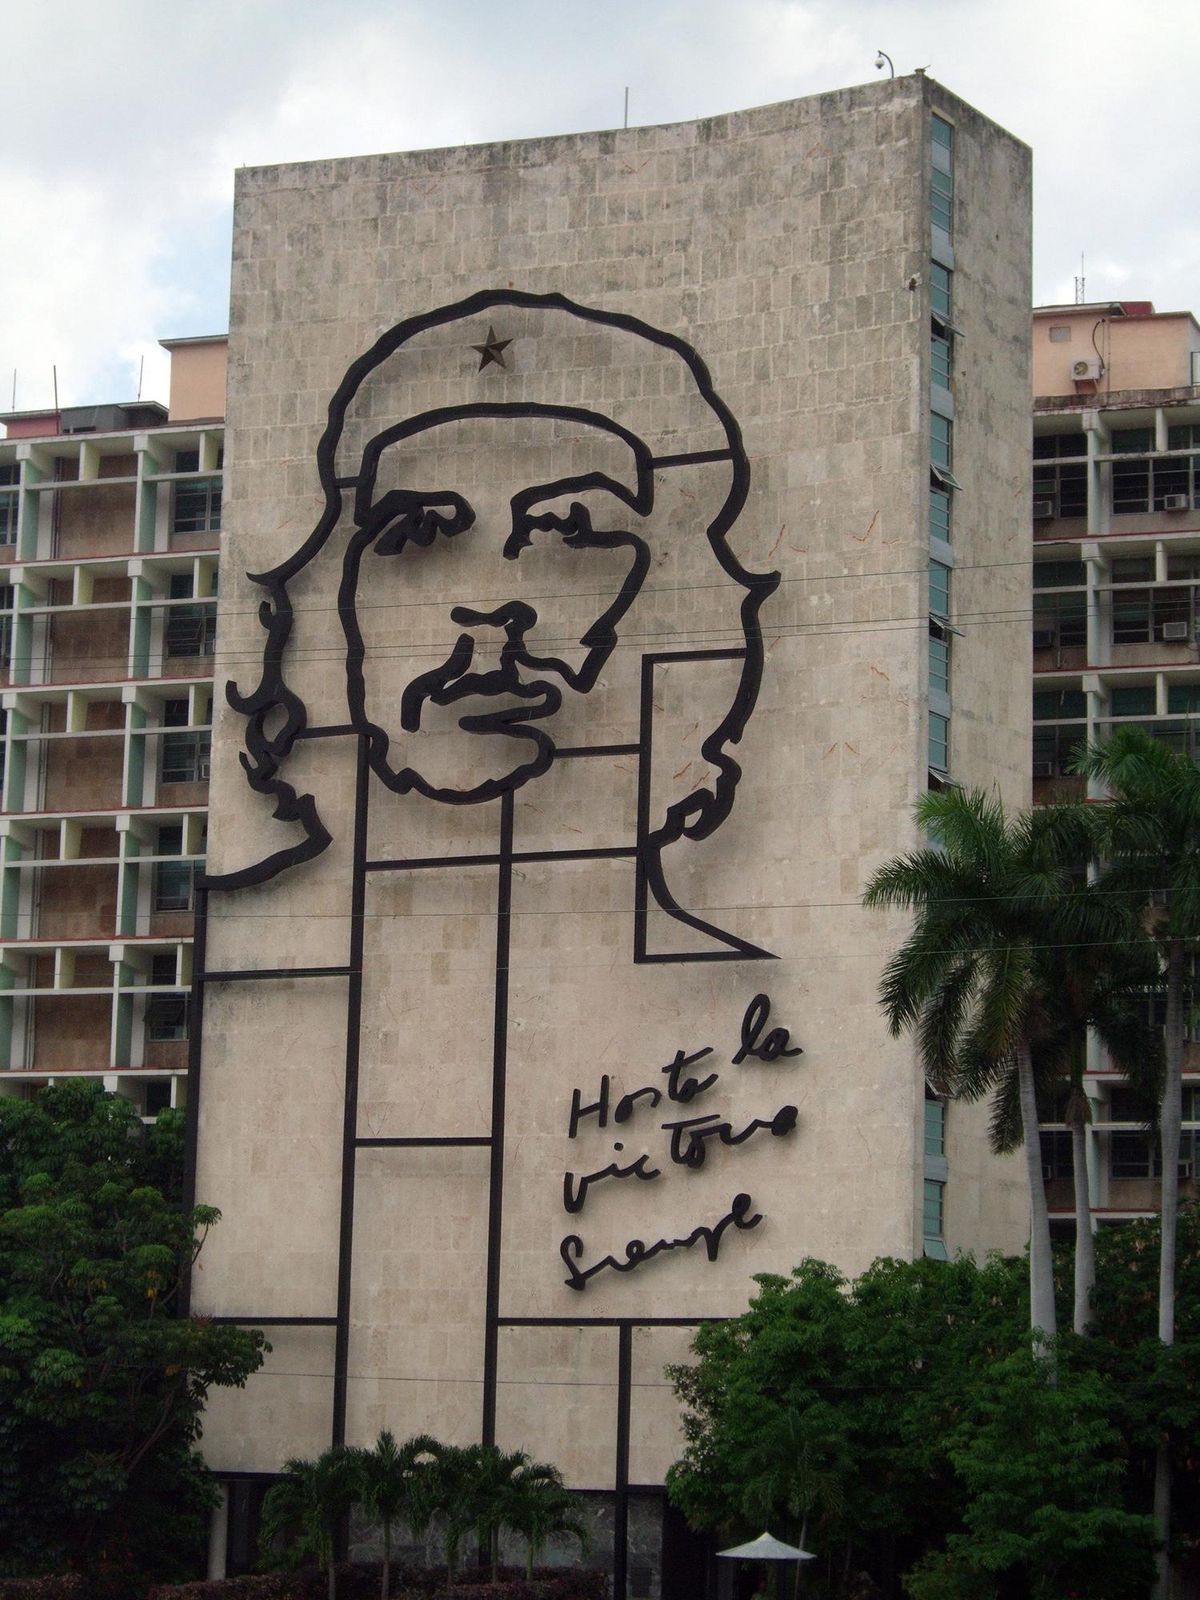 An image of Ernesto "Che" Guevara watches over the Plaza de la Revolución in Havana. Guevara, who participated in political movements in the mid 20th century, remains regarded as a national hero in Cuba. (Adriana Janovich / The Spokesman-Review)